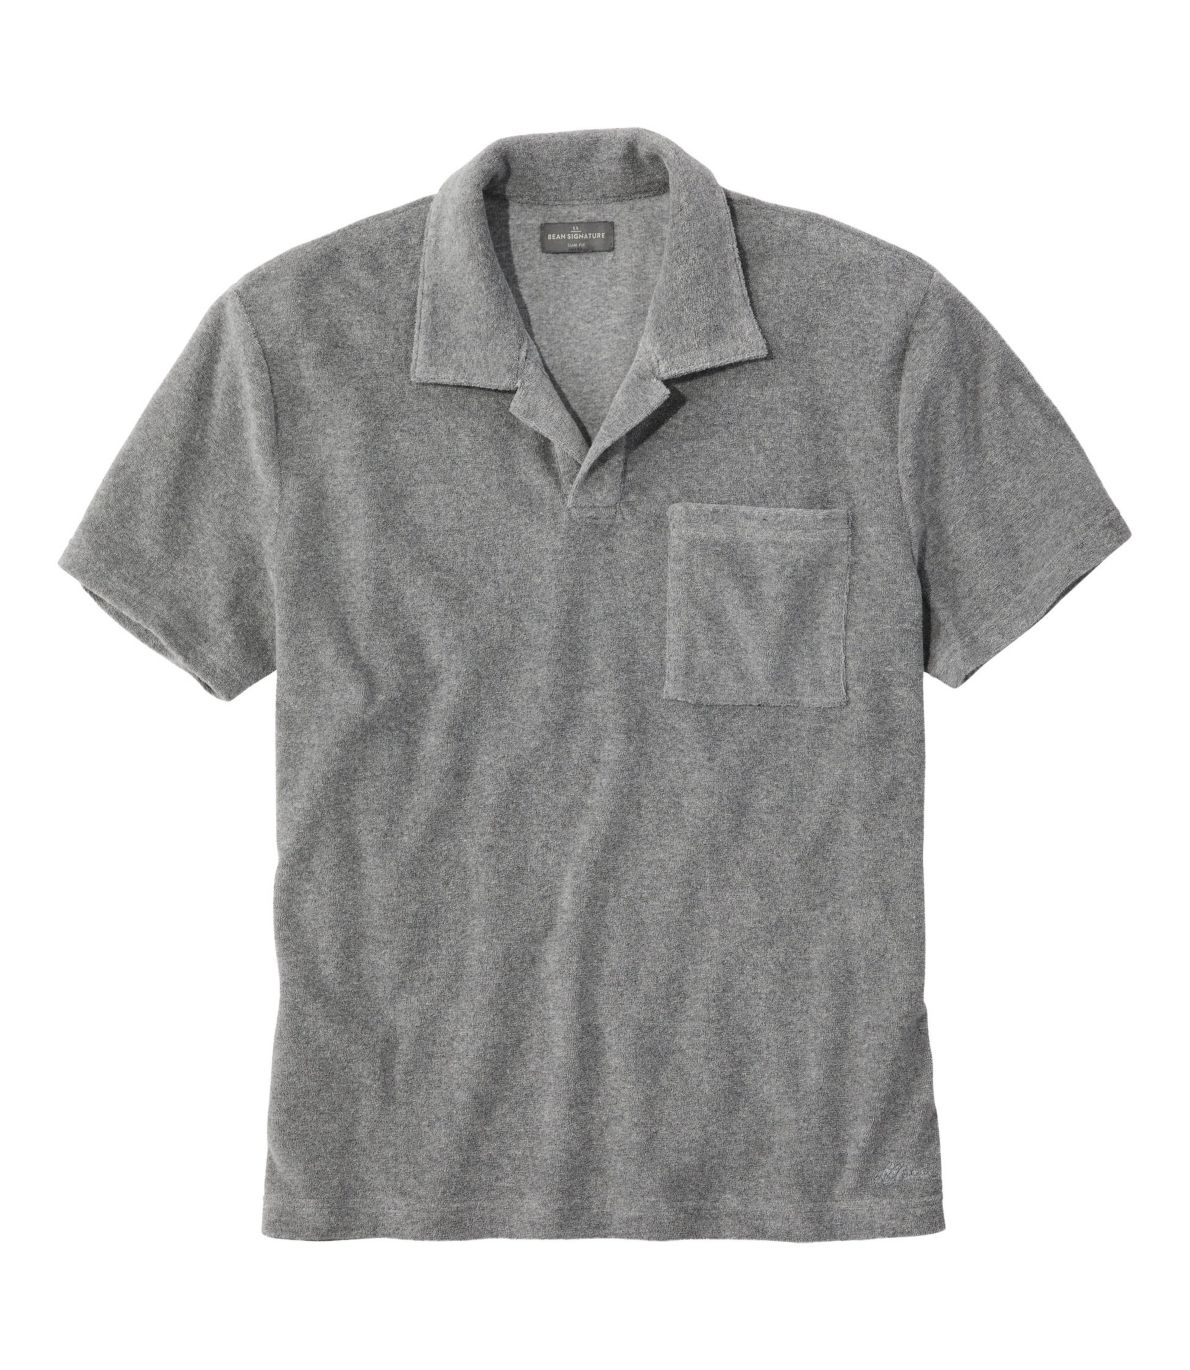 Men's Signature Terry Polo, Short-Sleeve, Slim Fit